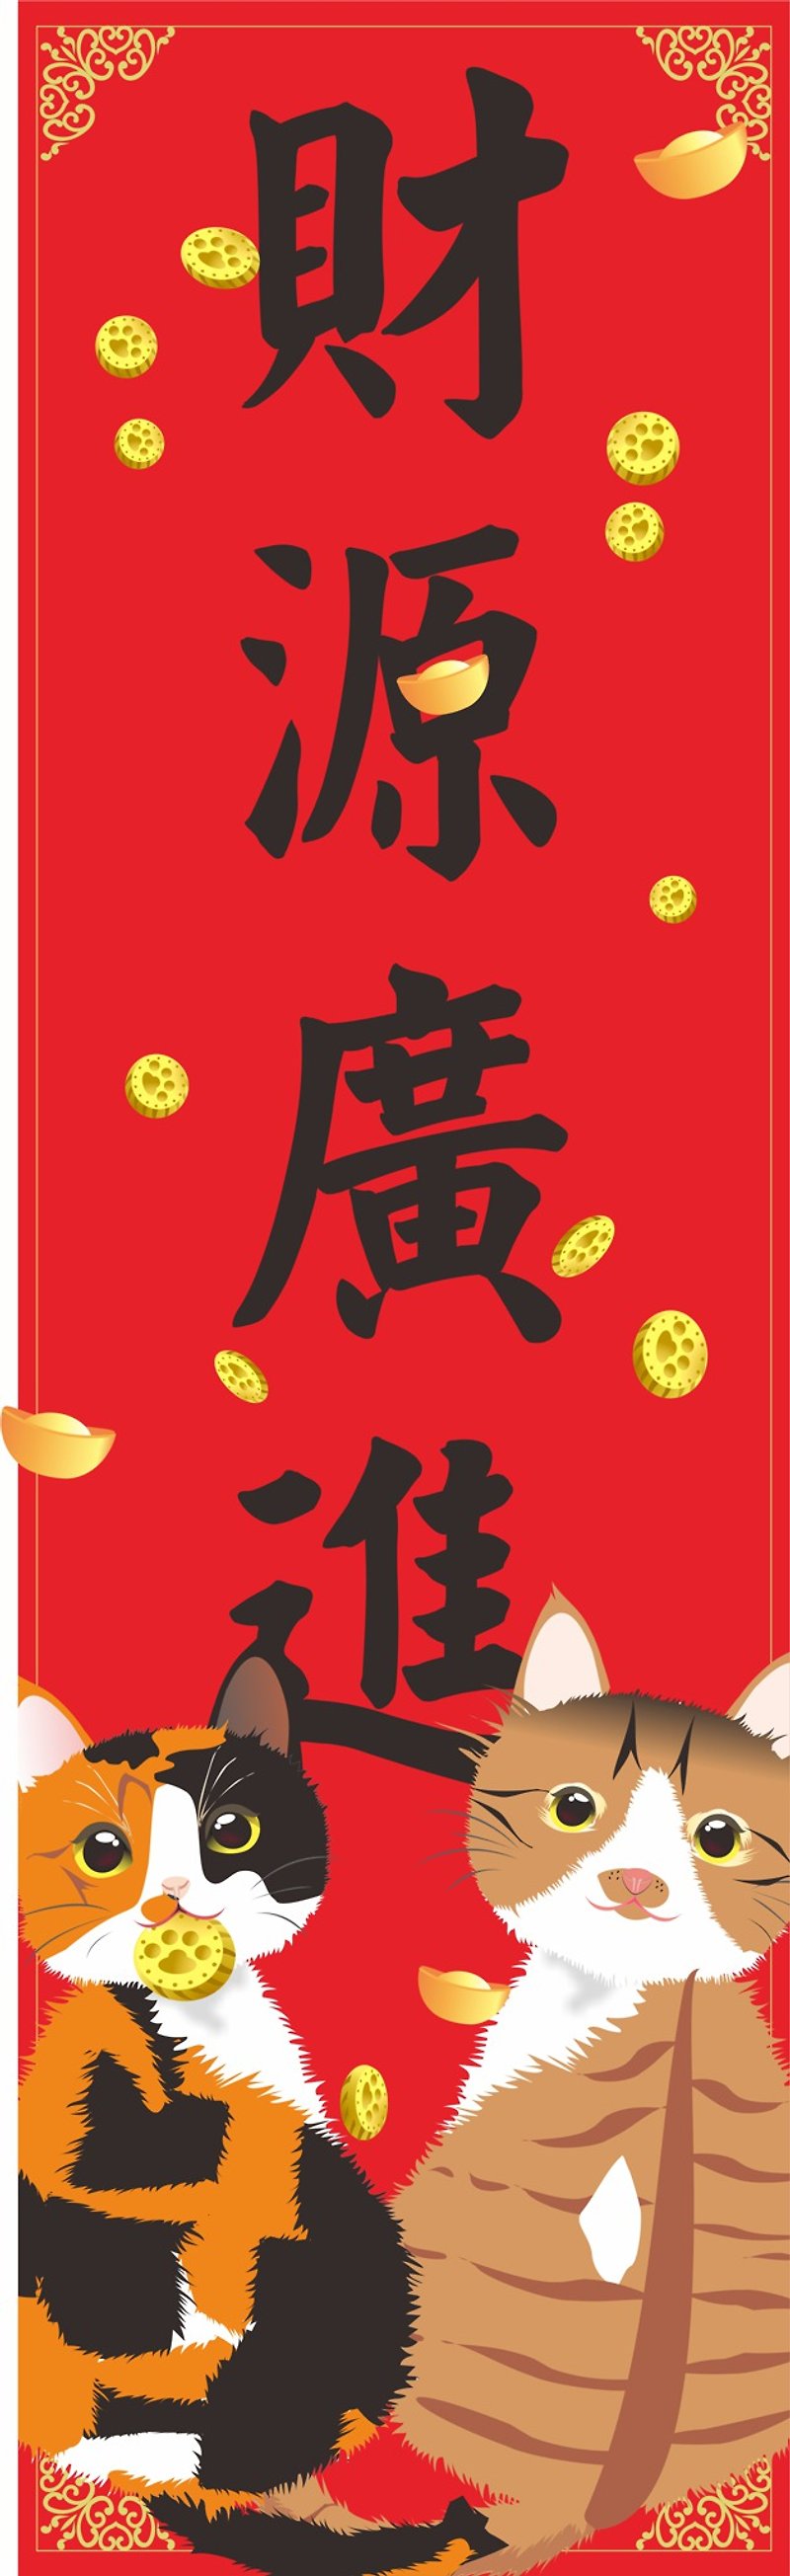 New year. Spring couplets. Wealth is growing. Cat. 2021 Year of the Ox - Chinese New Year - Waterproof Material Red